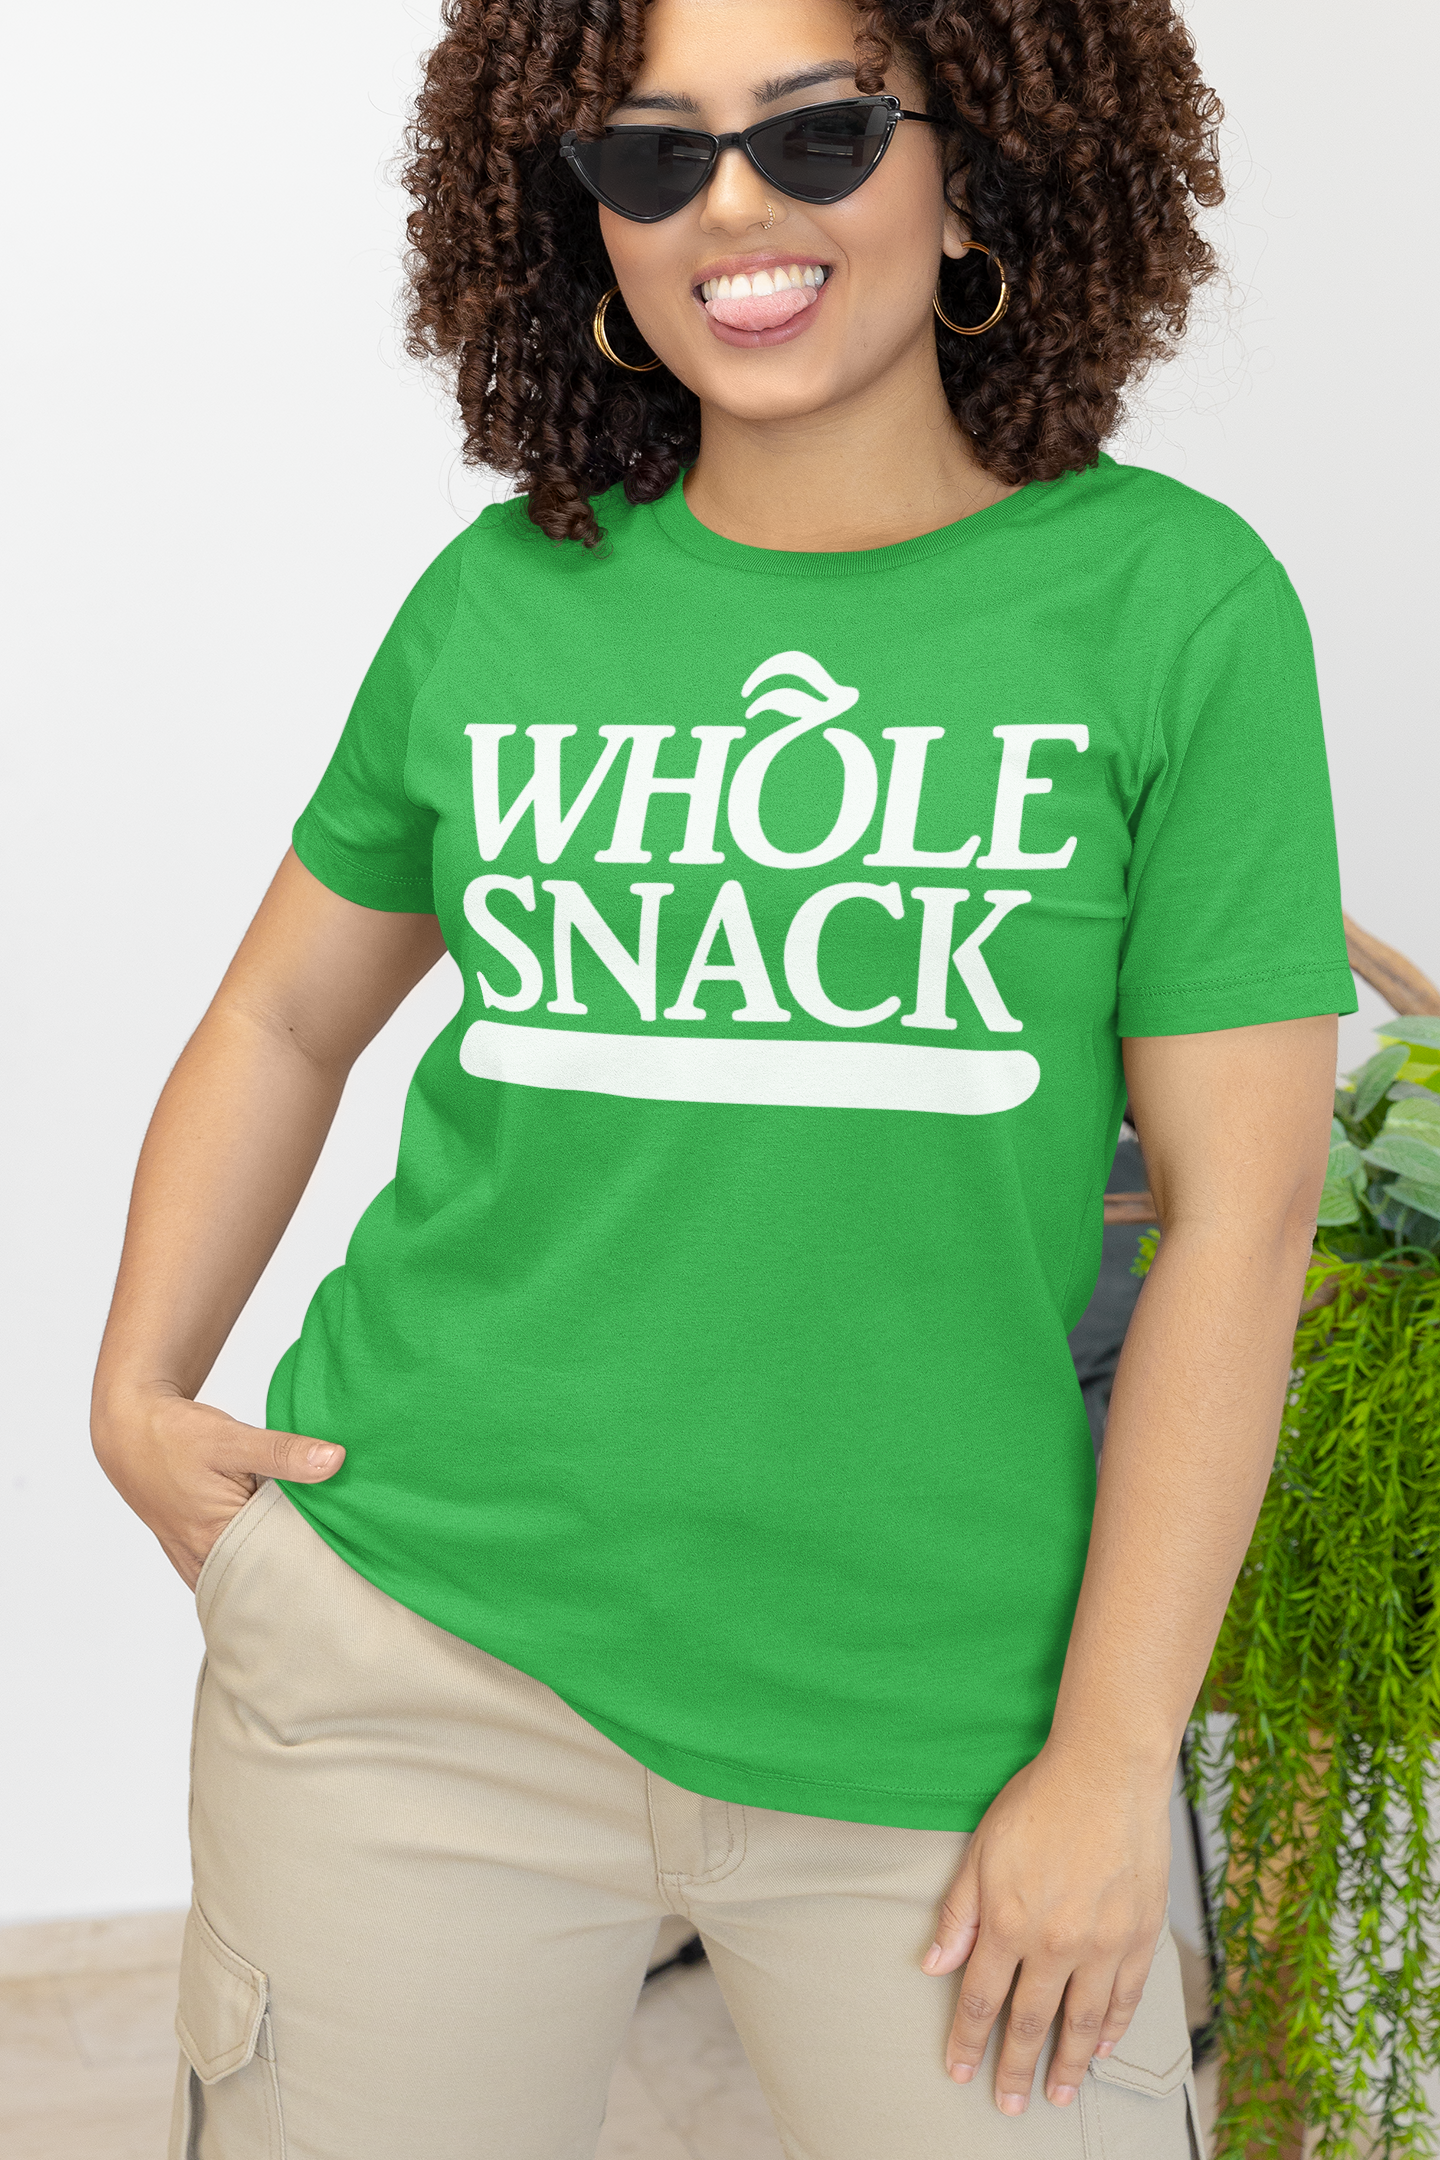 Whole Snack